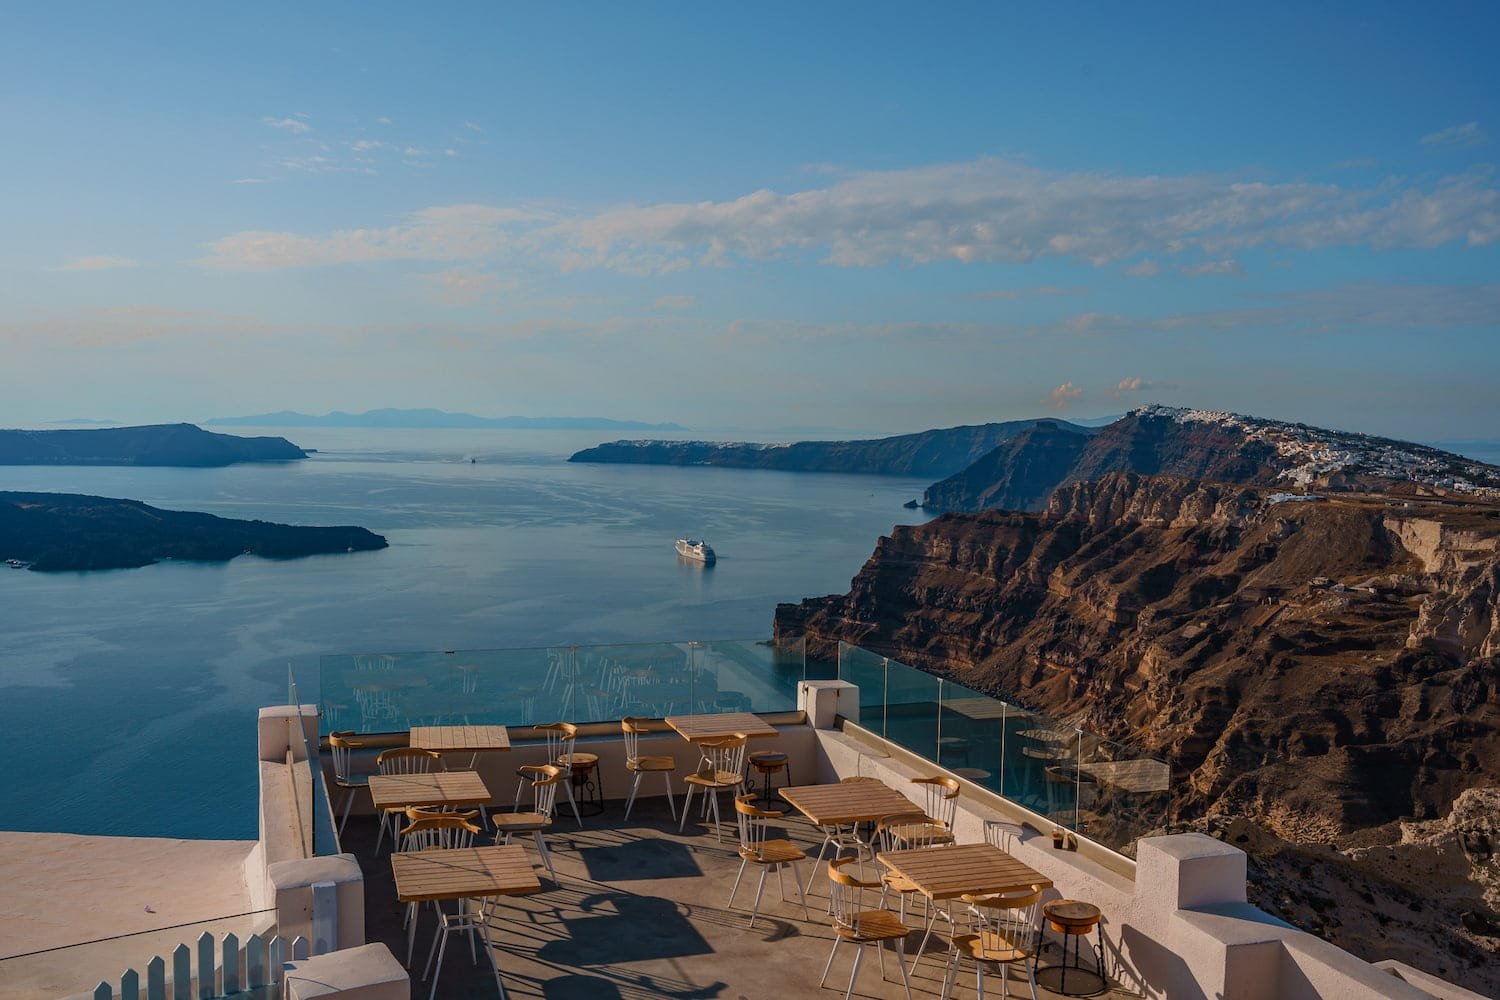 3 Day Santorini Itinerary: Explore the stunning island of Santorini, Greece. Visit iconic blue-domed churches, swim in crystal clear waters and immerse yourself in the rich history and Santos Winery